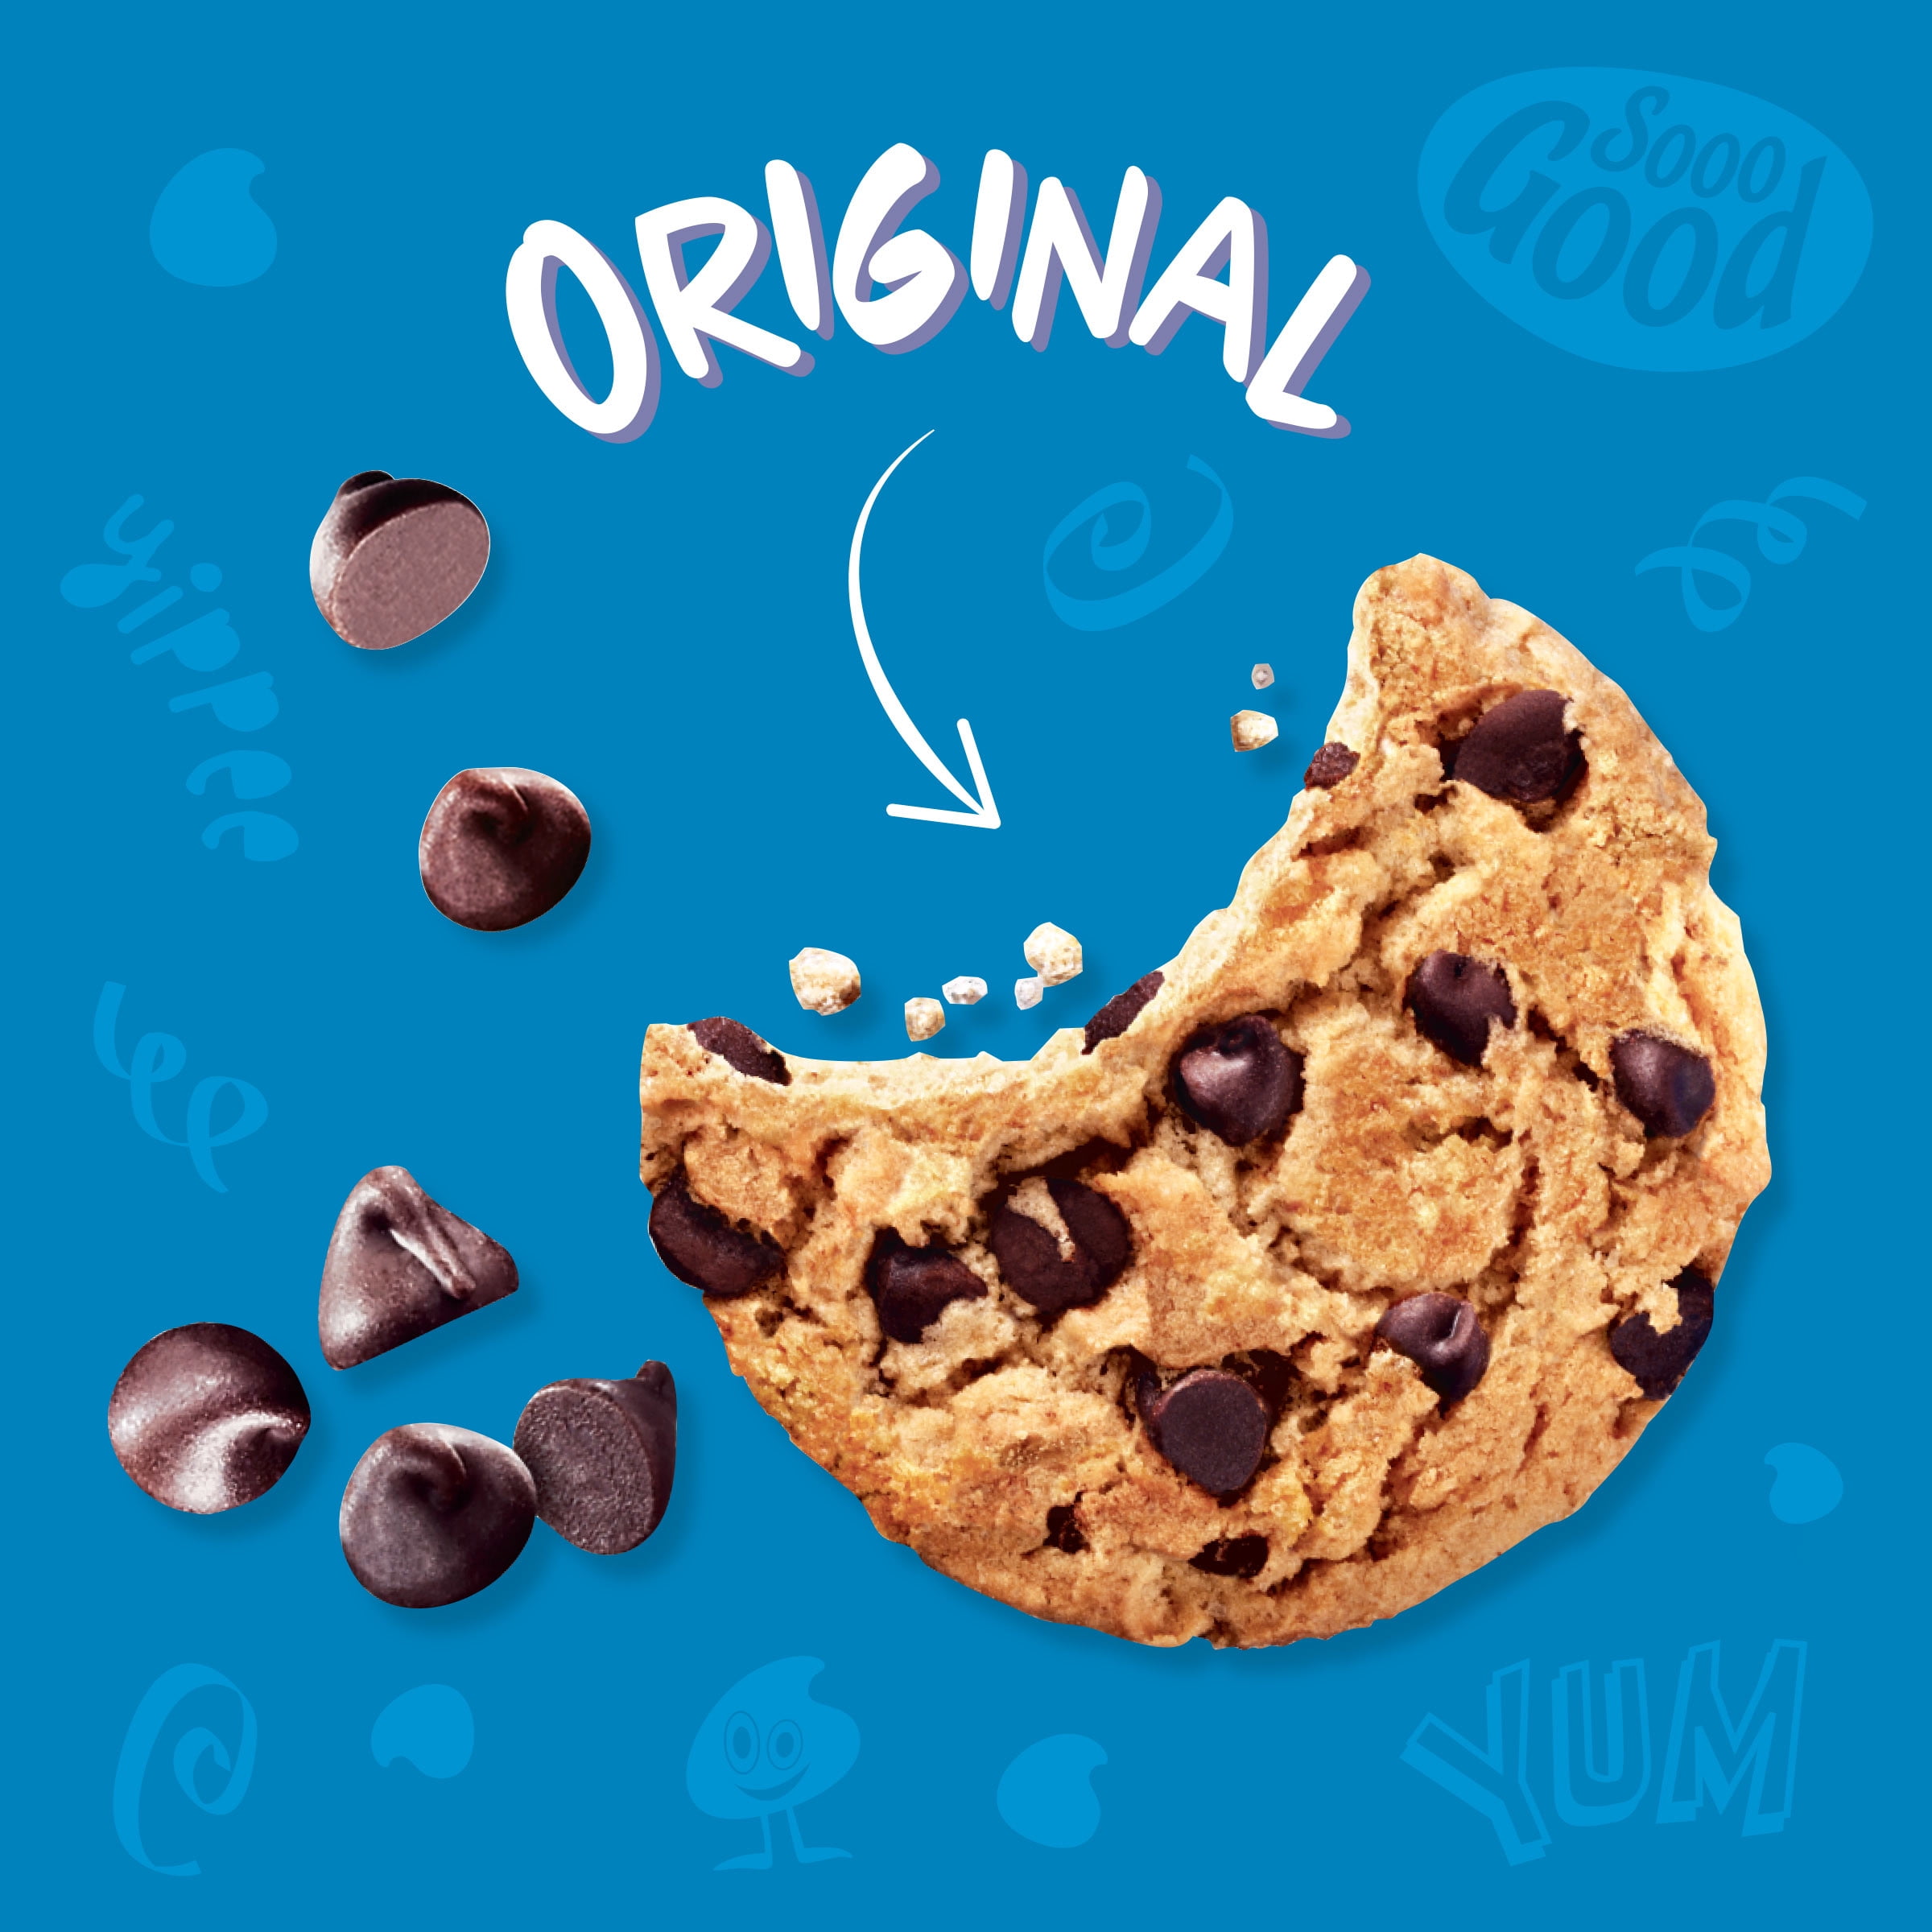 Buy CHIPS AHOY! Original Chocolate Chip Cookies, Party Size, 25.3 oz ...